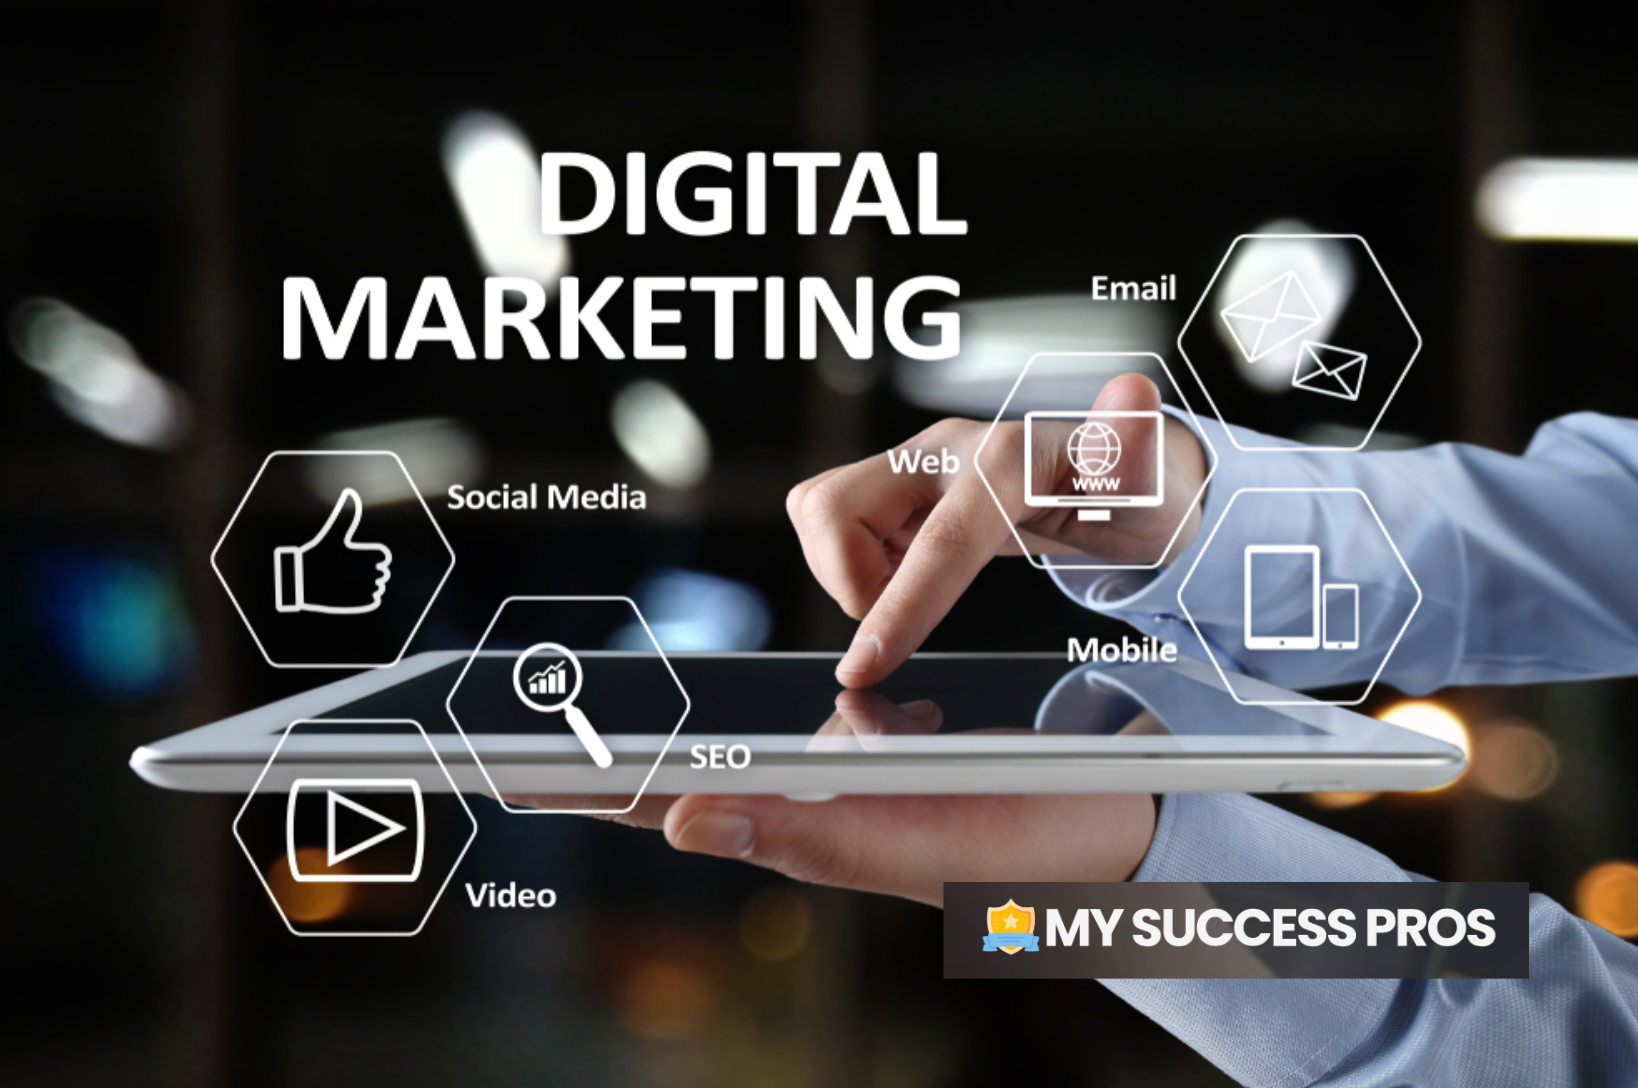 Digital Marketing: Are You Missing The Mark? My Success Pros Shares Their Best Tips